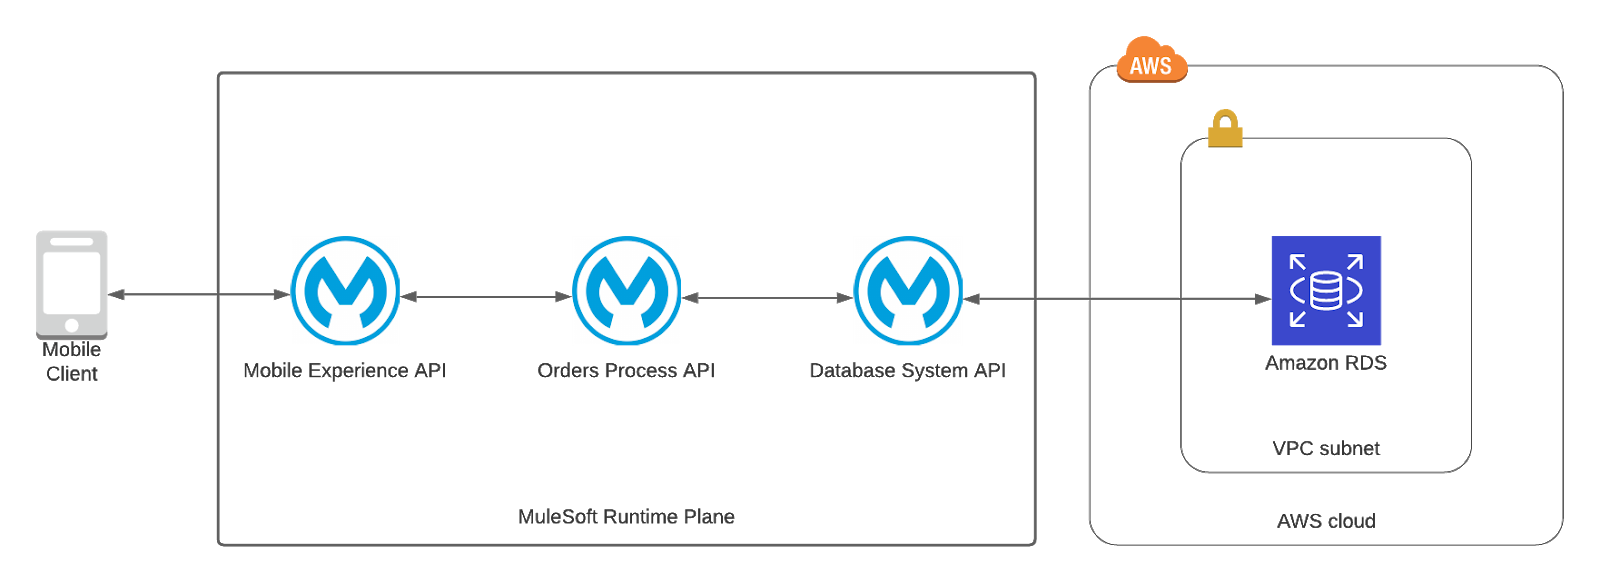 7 Use Cases for AWS and MuleSoft